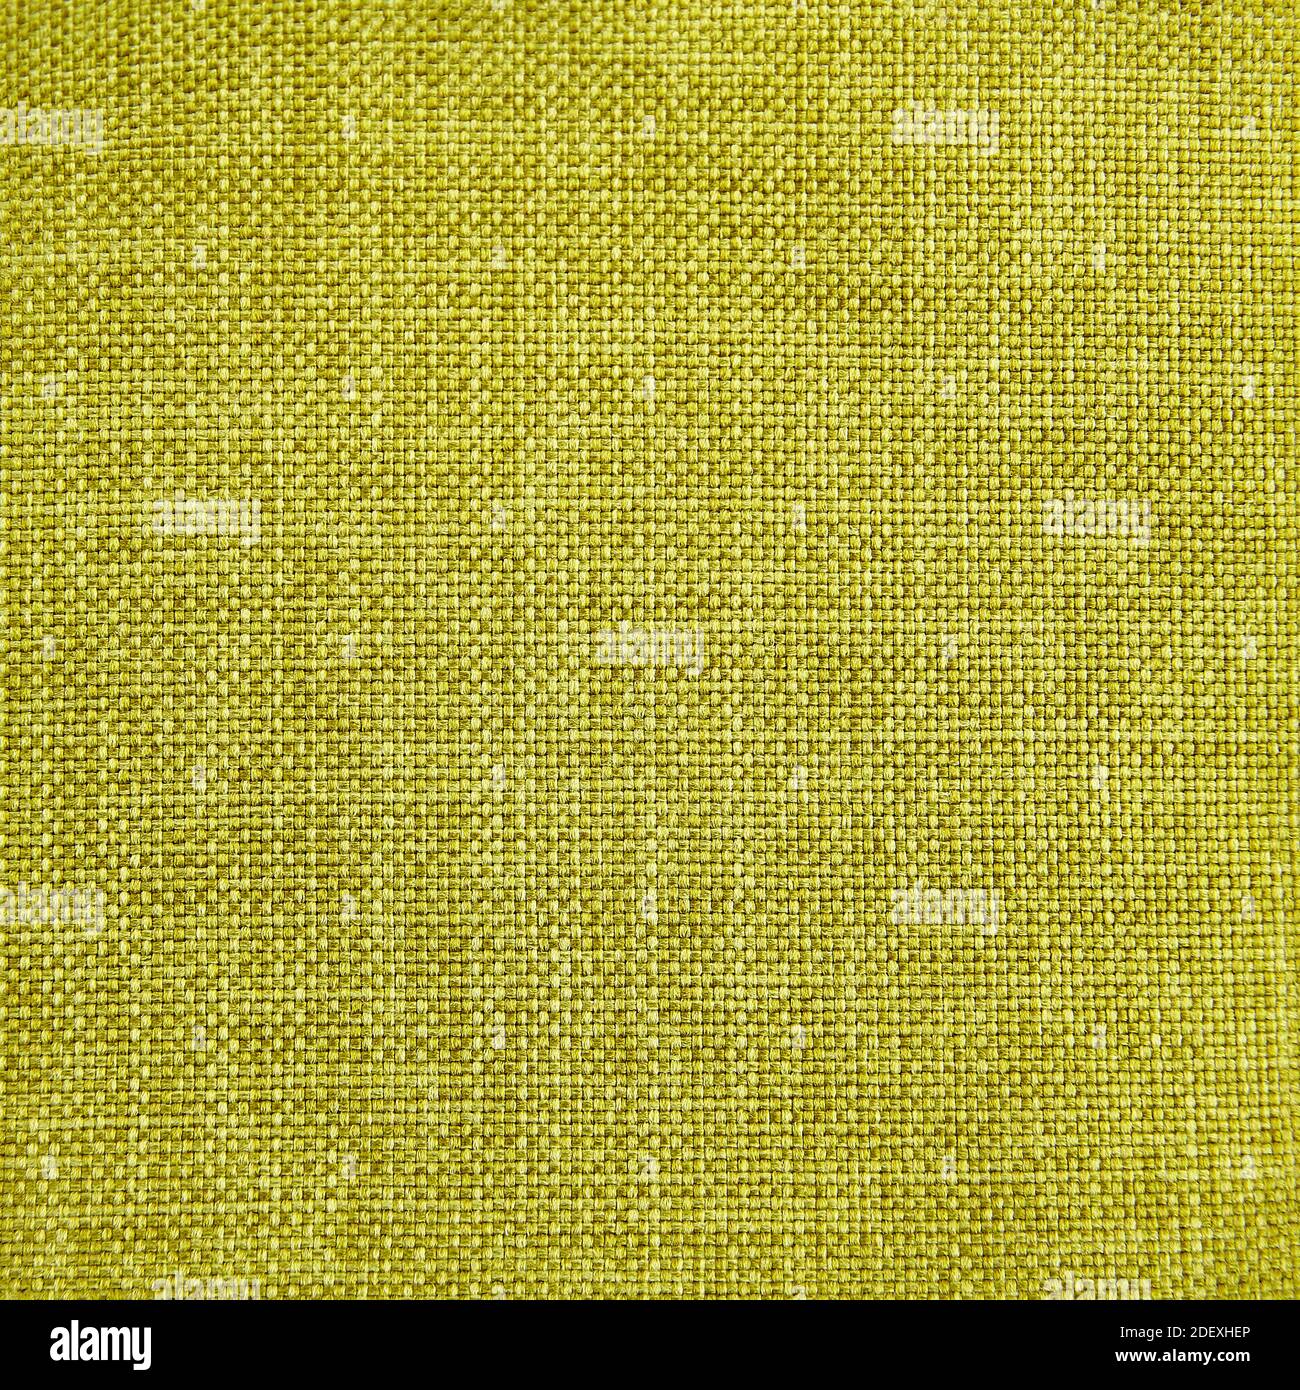 Fabric texture light green color for background or design Stock Photo